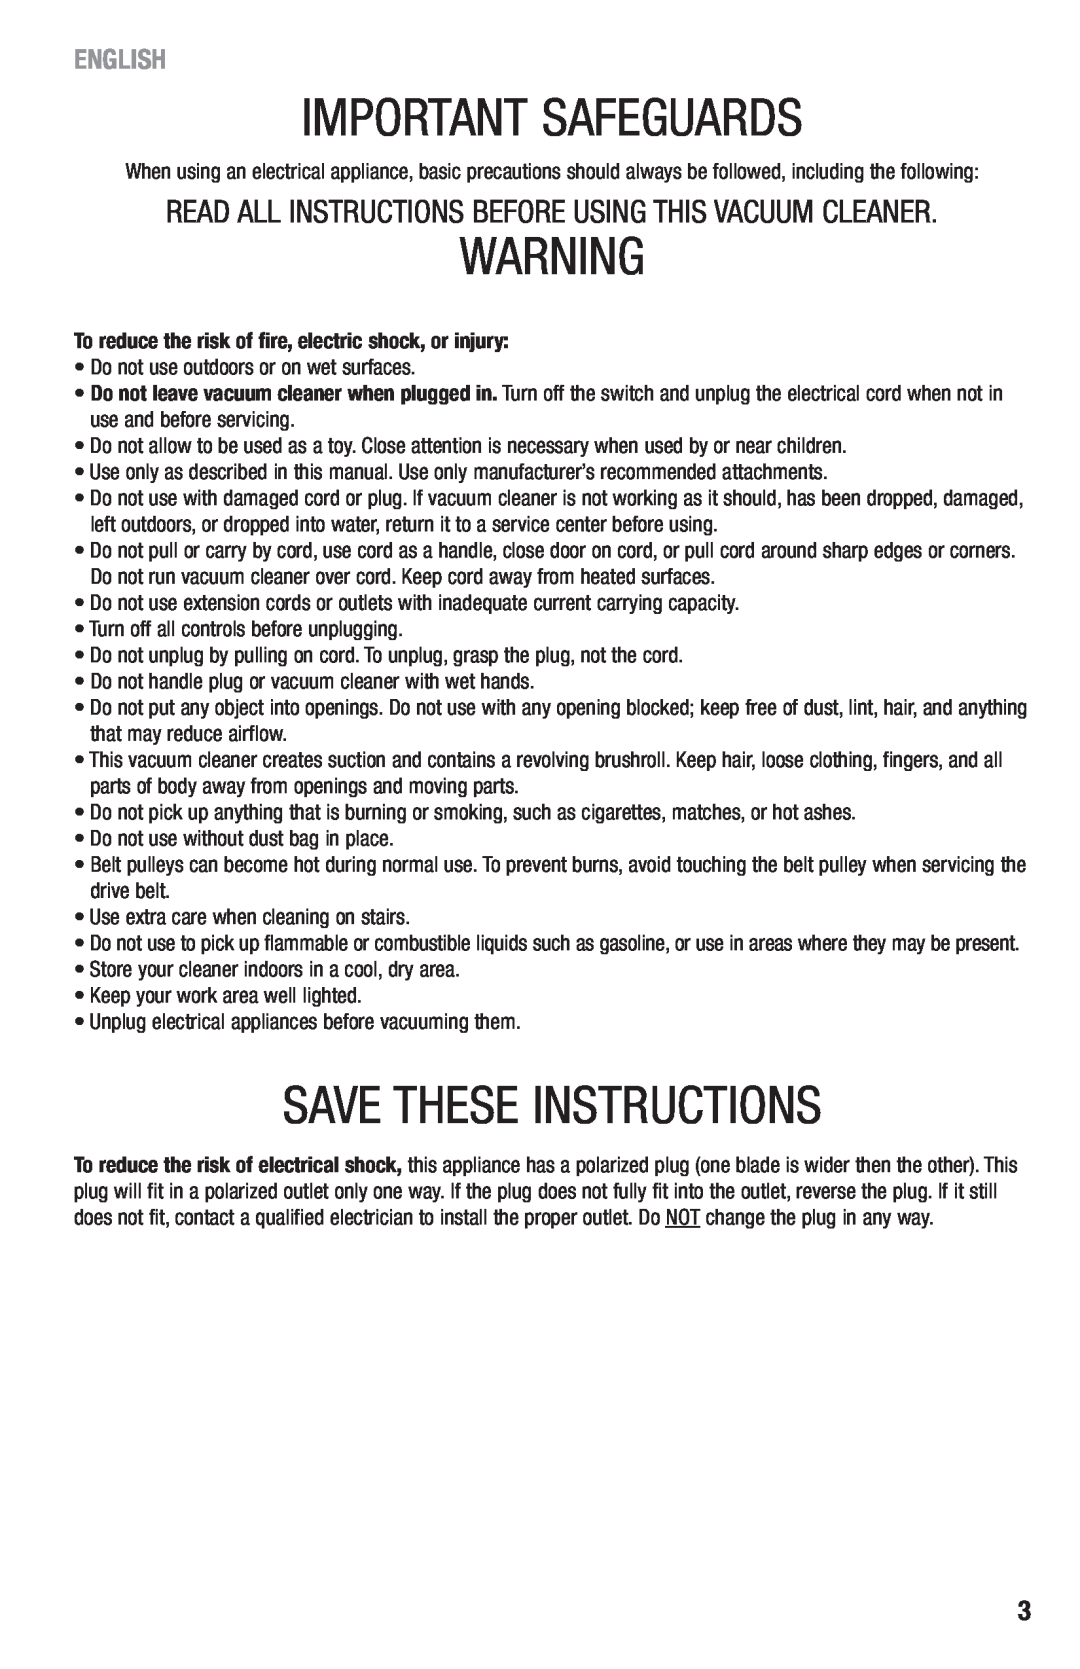 Eureka 410 Important Safeguards, Save These Instructions, To reduce the risk of fire, electric shock, or injury, English 